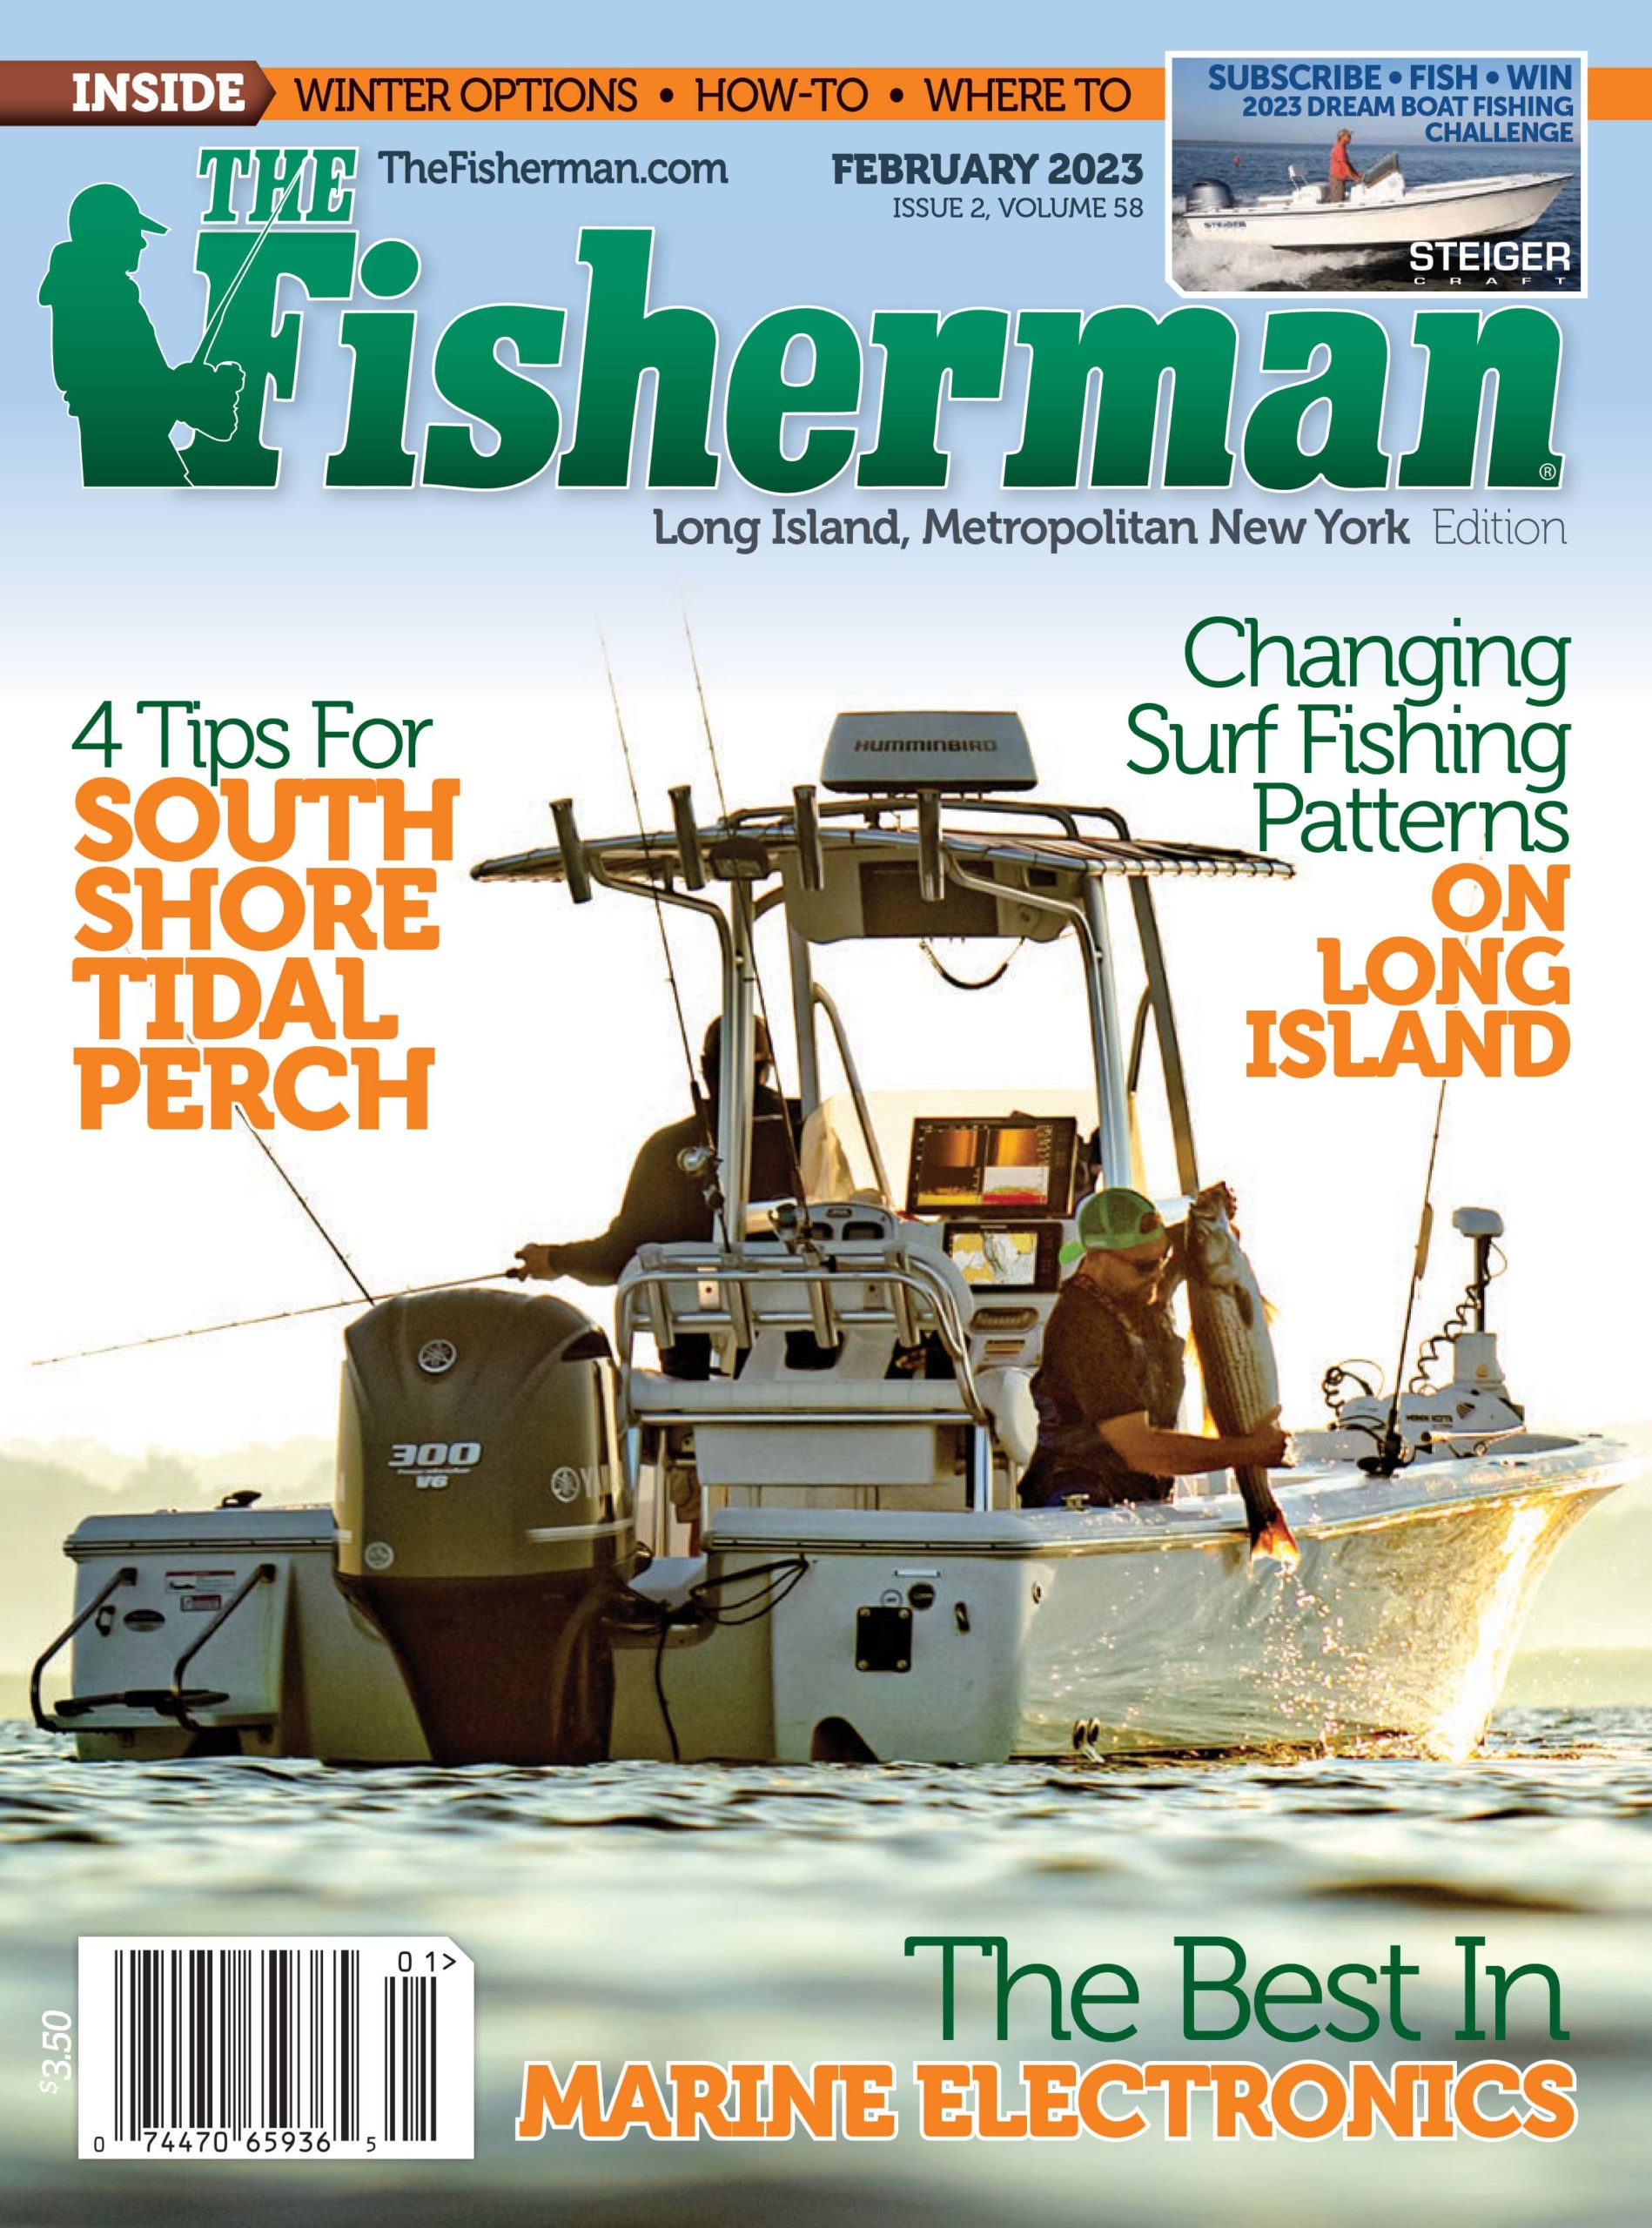 Winter White Perchin': 4 Things To Remember - The Fisherman